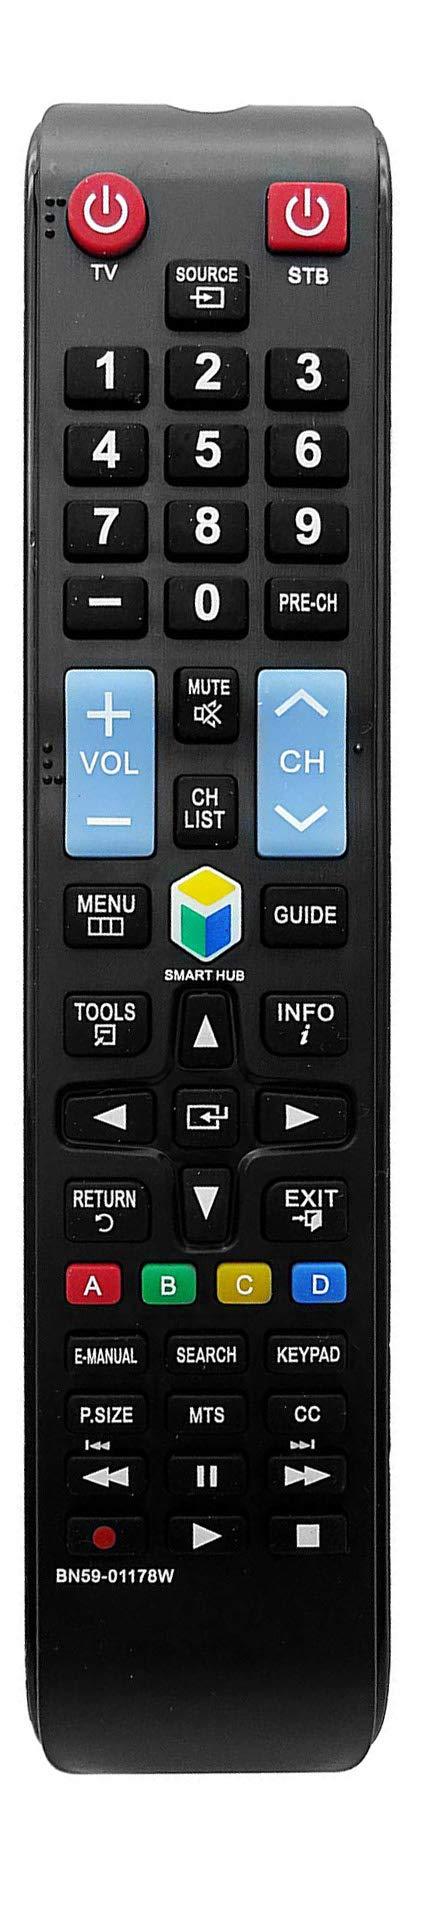 New BN59-01178W Remote Control Replaced for Samsung LED HDTV TV Remote BN5901178W